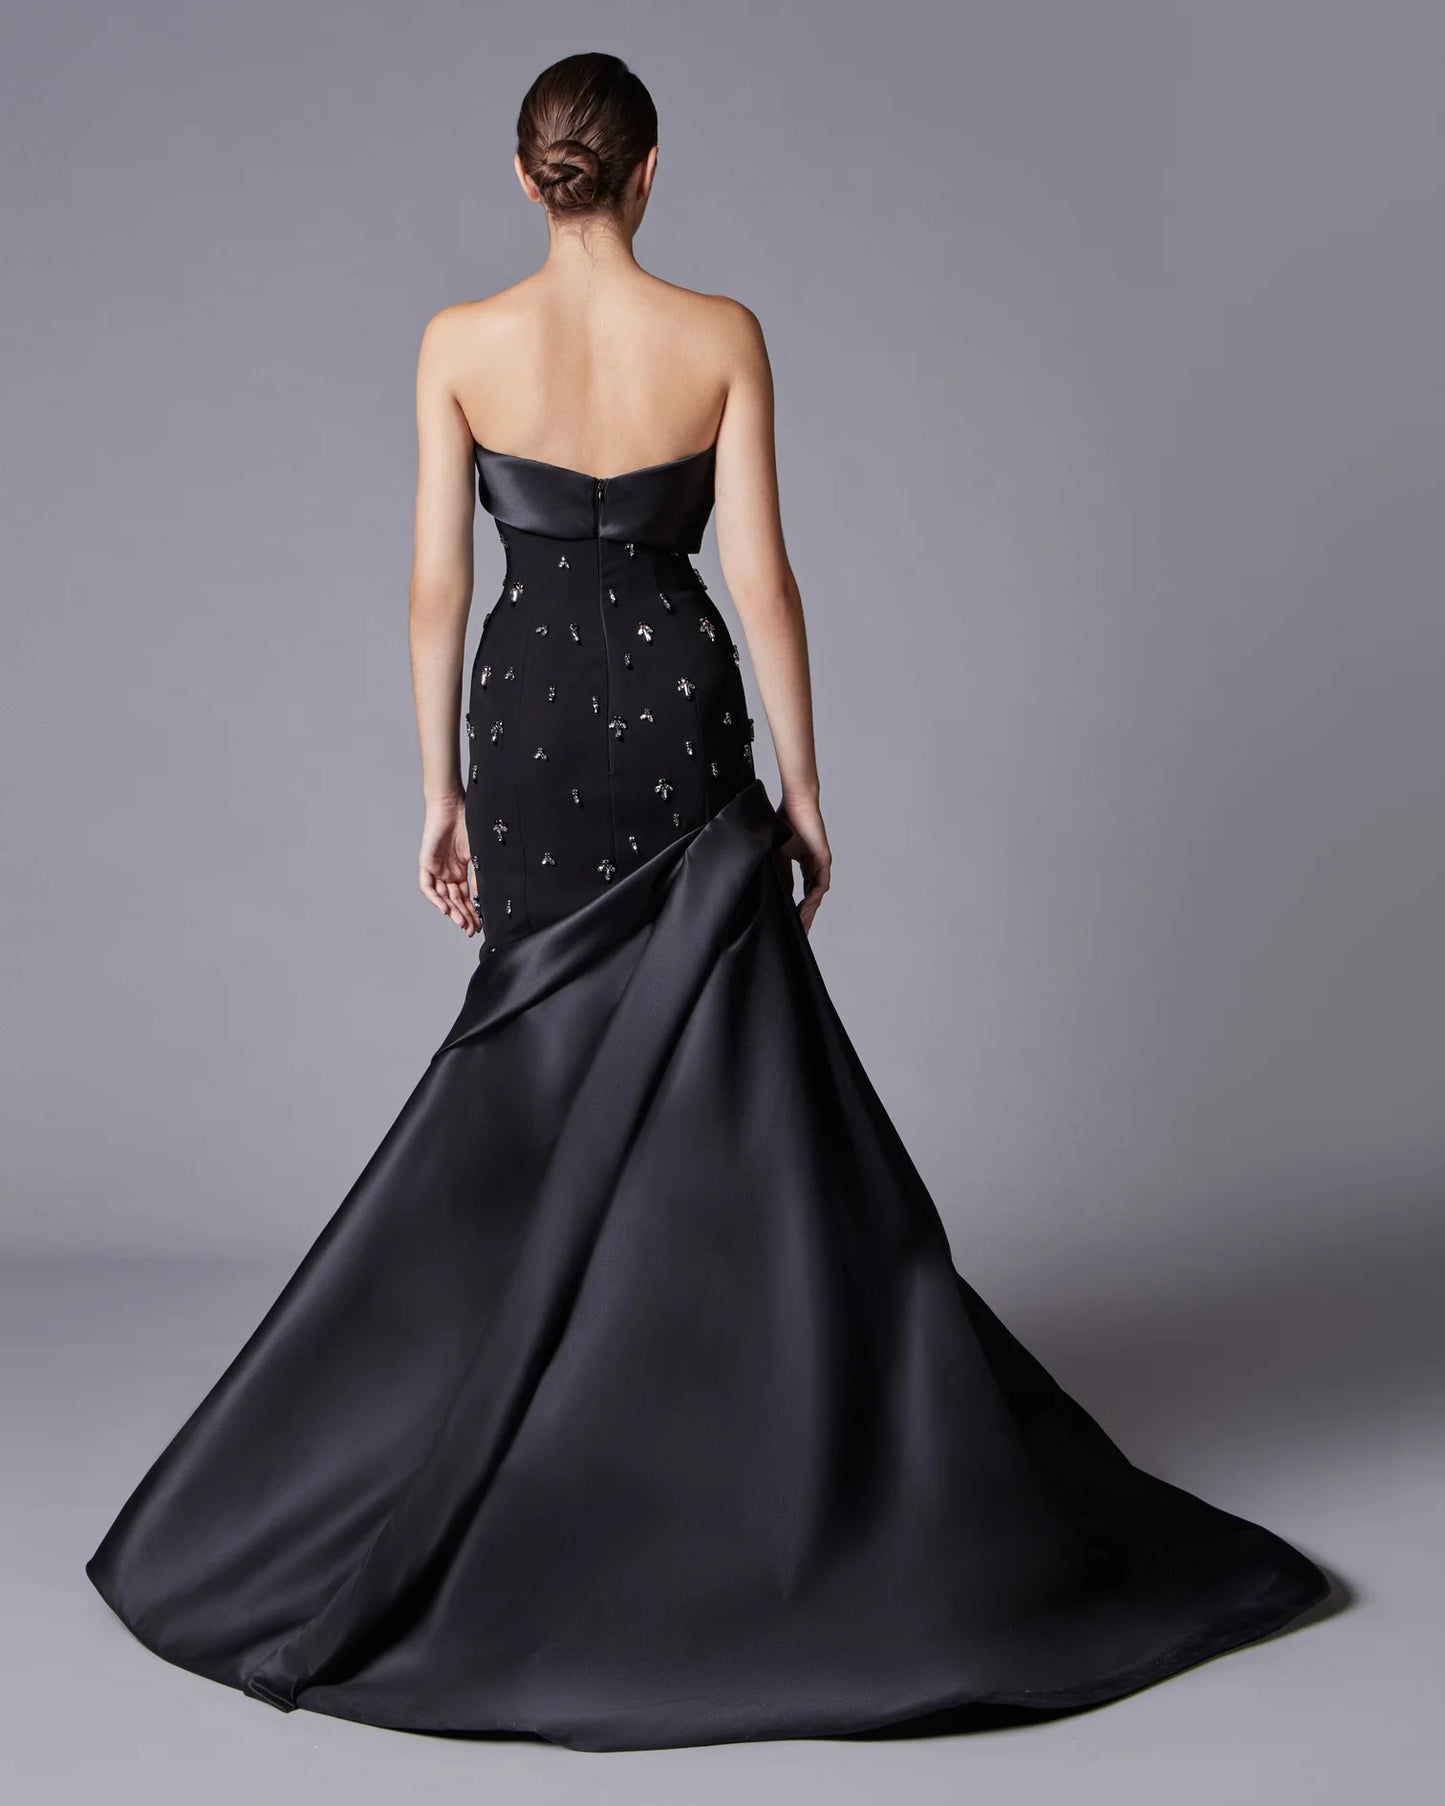 Crown Jewel Gown